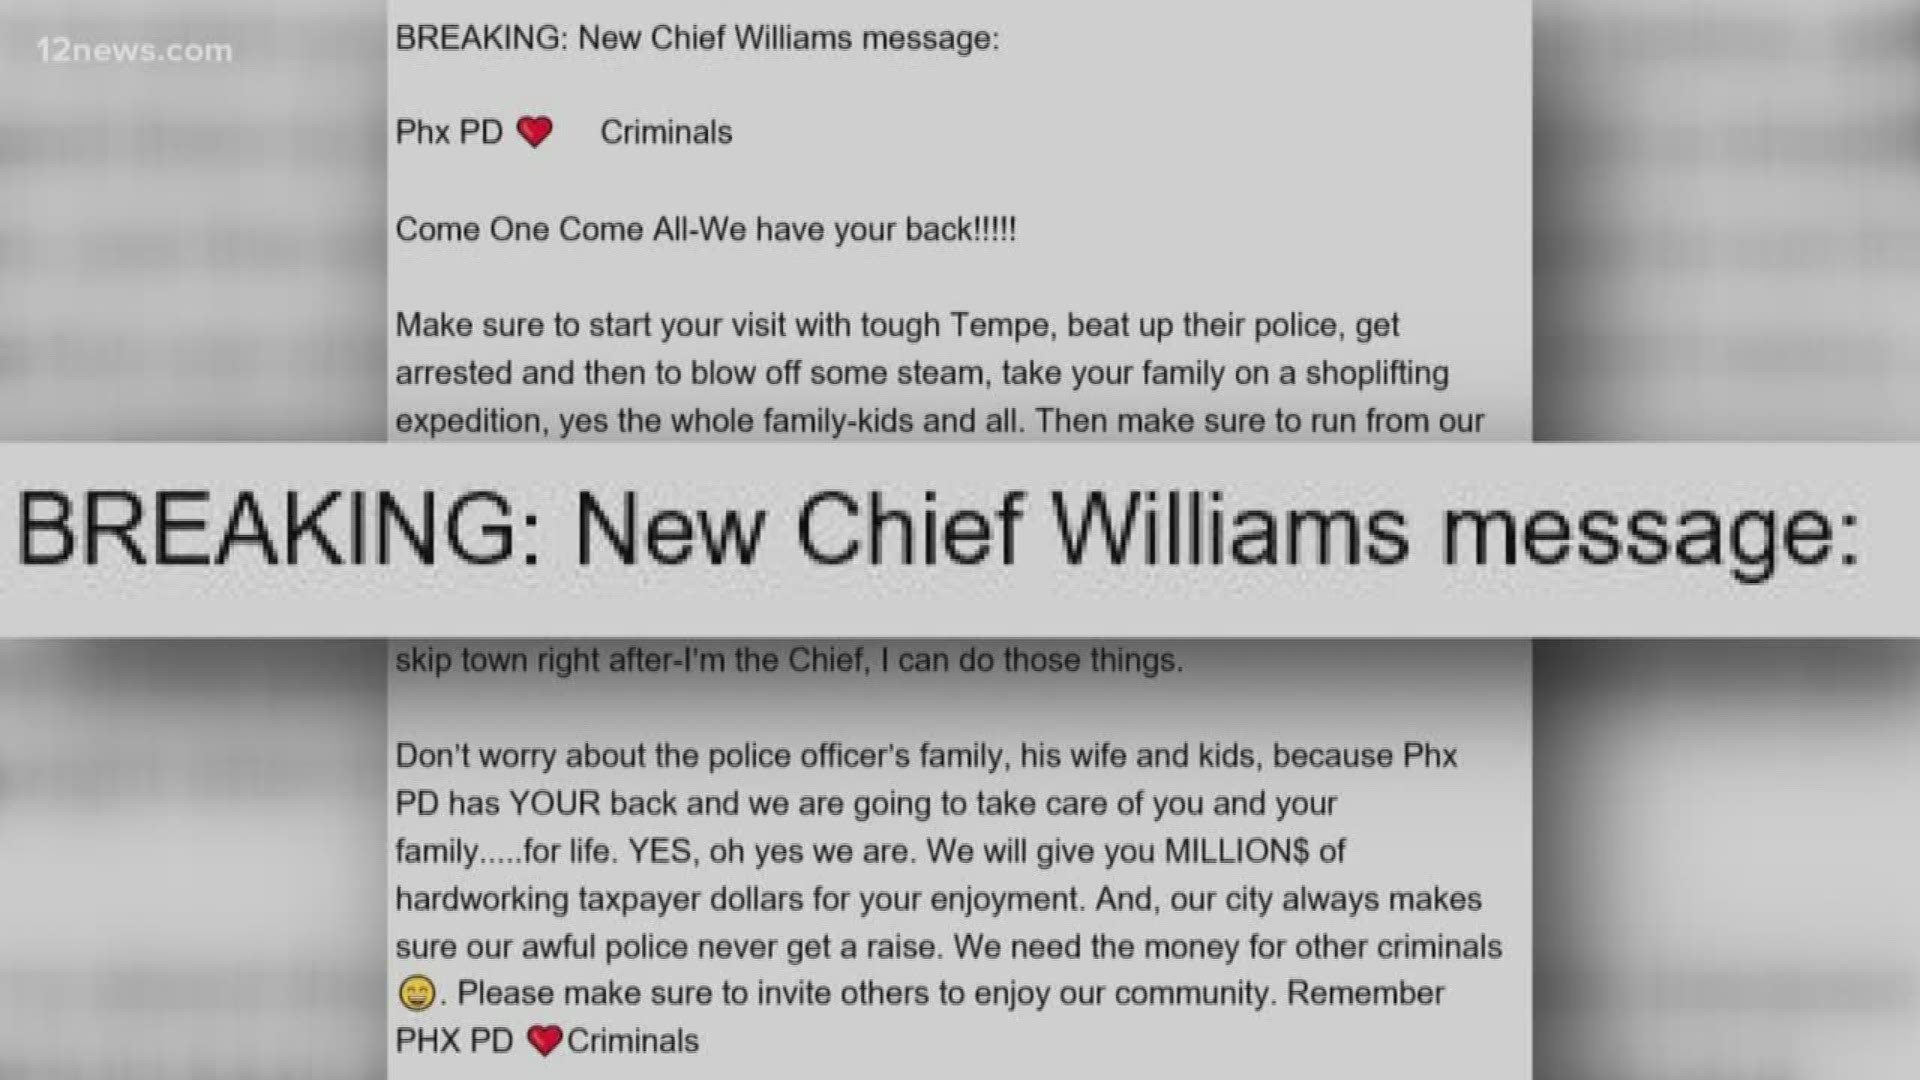 Phoenix Councilman Sal DiCiccio criticized Chief Williams' decision to fire two officers. The officers were involved in a contenious confrontation in July.